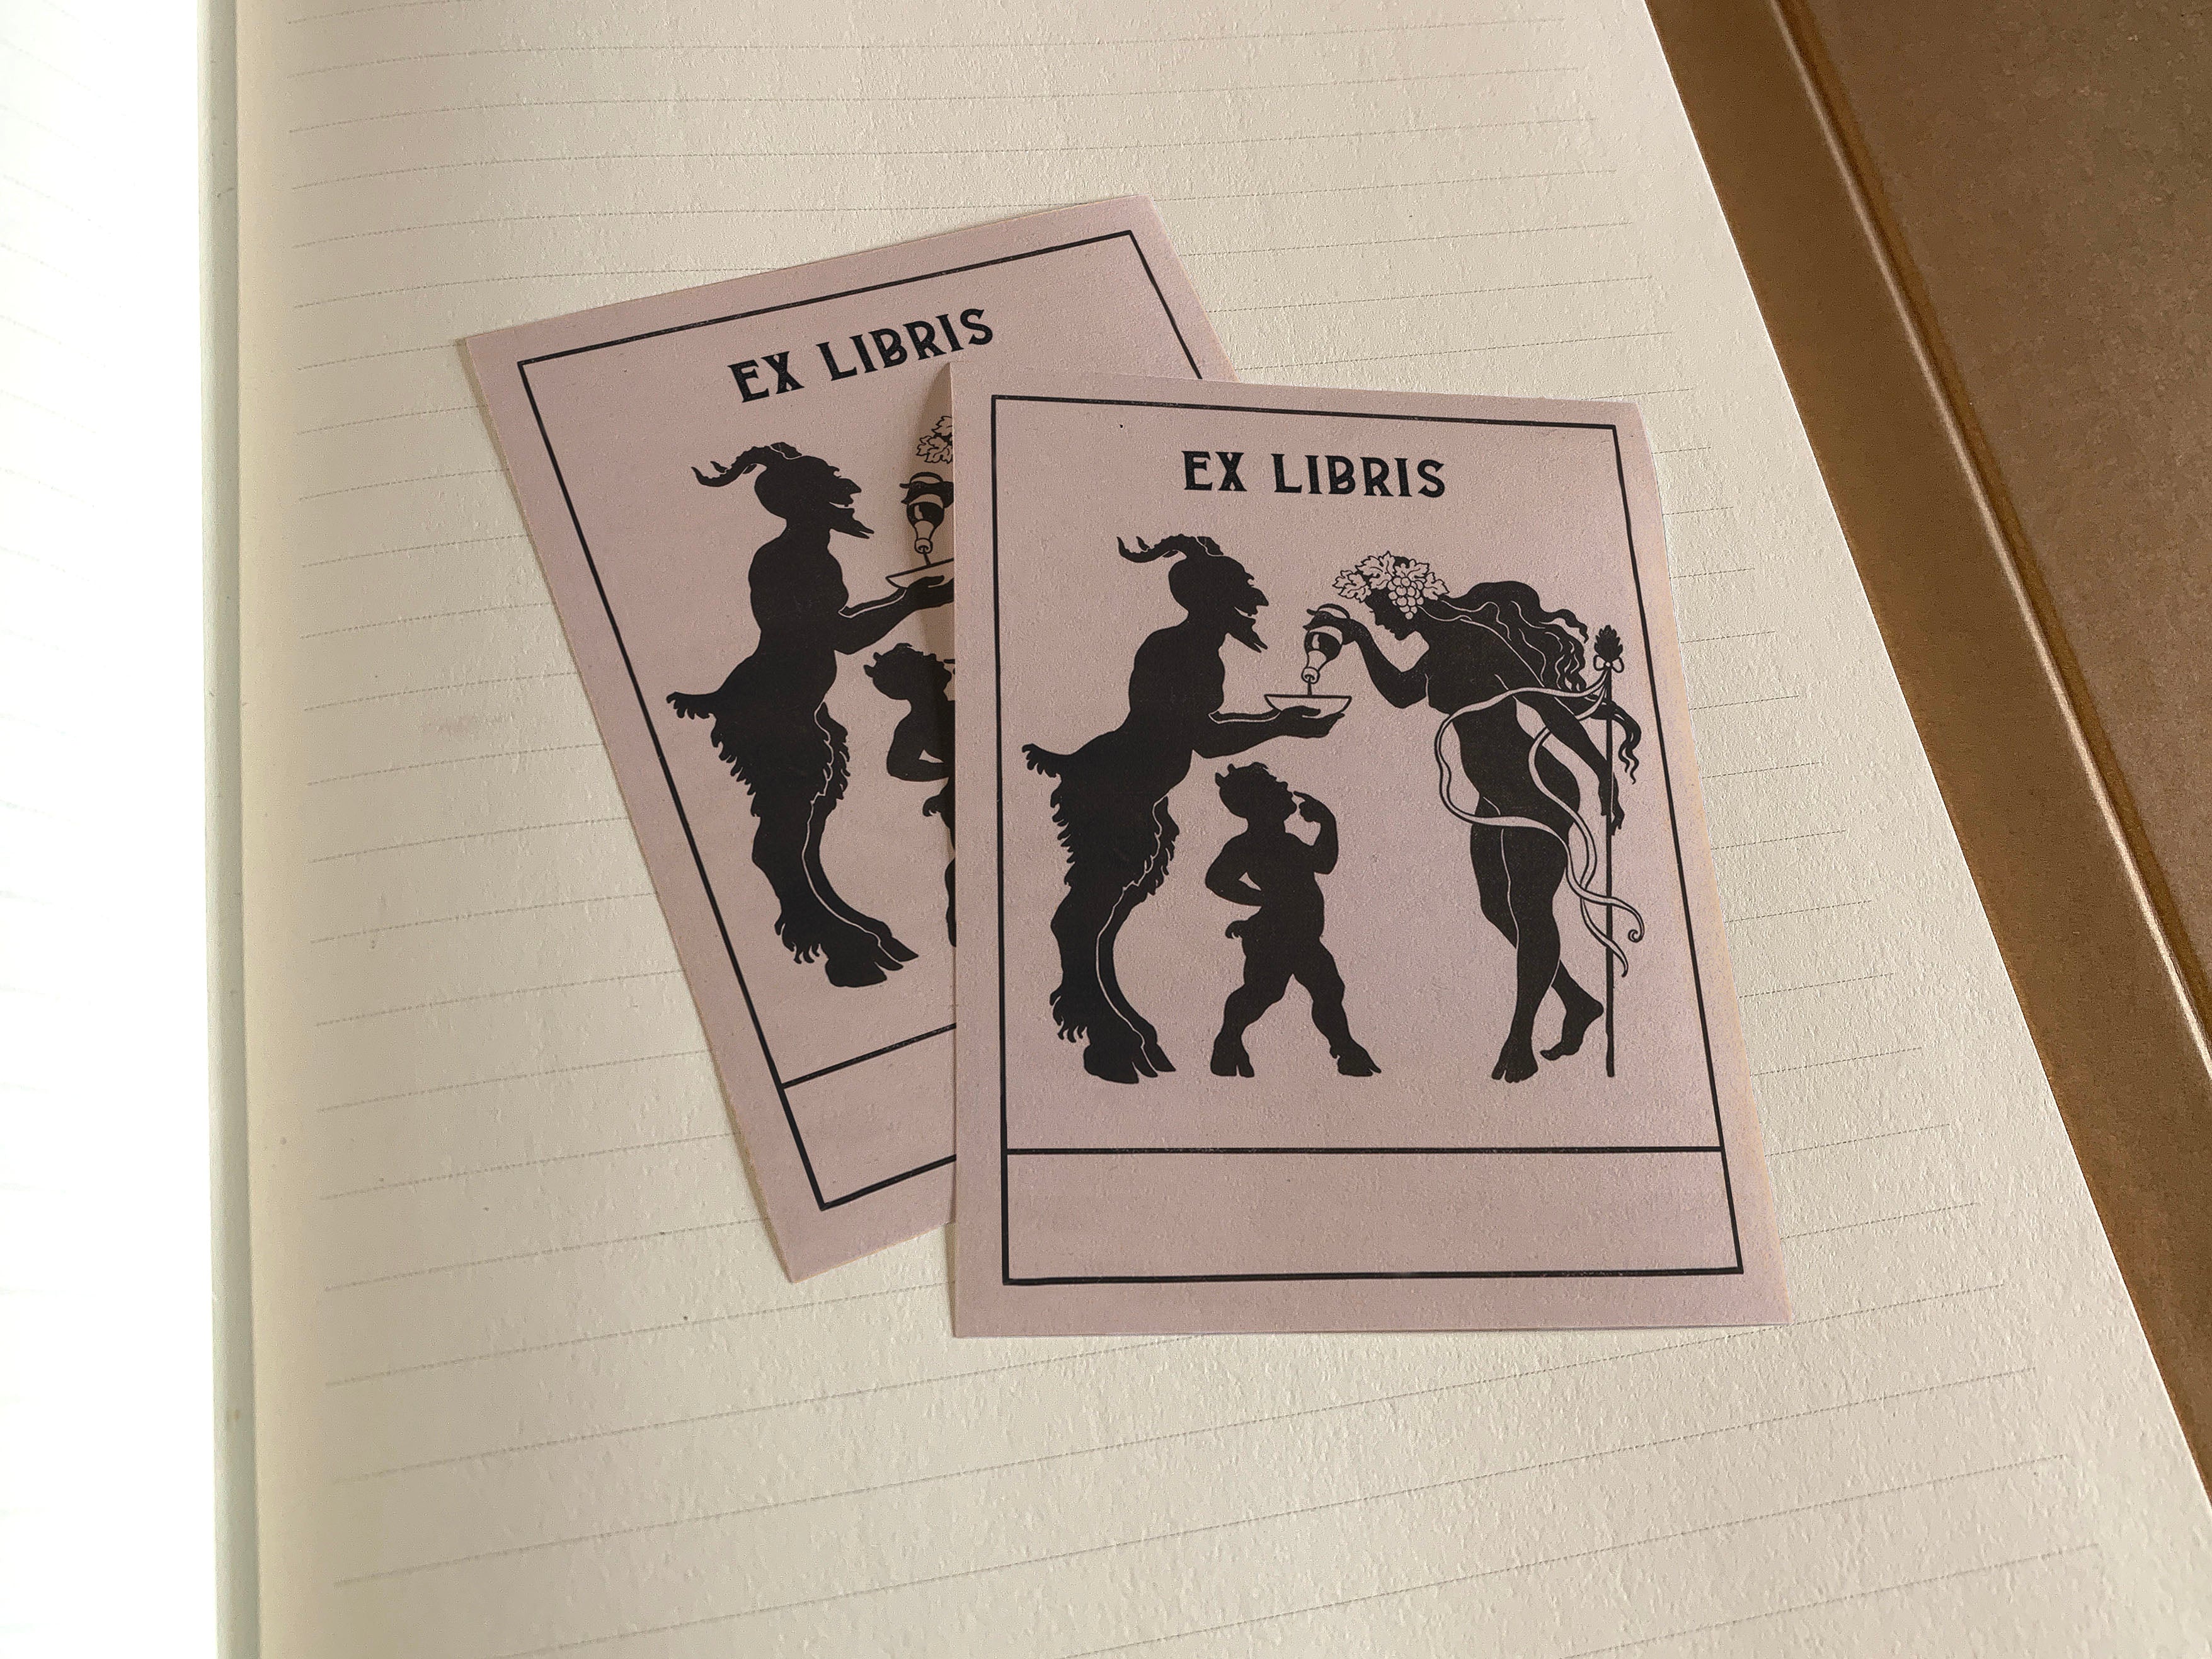 Satyr and Maenad, Personalized, Ex-Libris Bookplates, Crafted on Traditional Gummed Paper, 3in x 4in, Set of 30